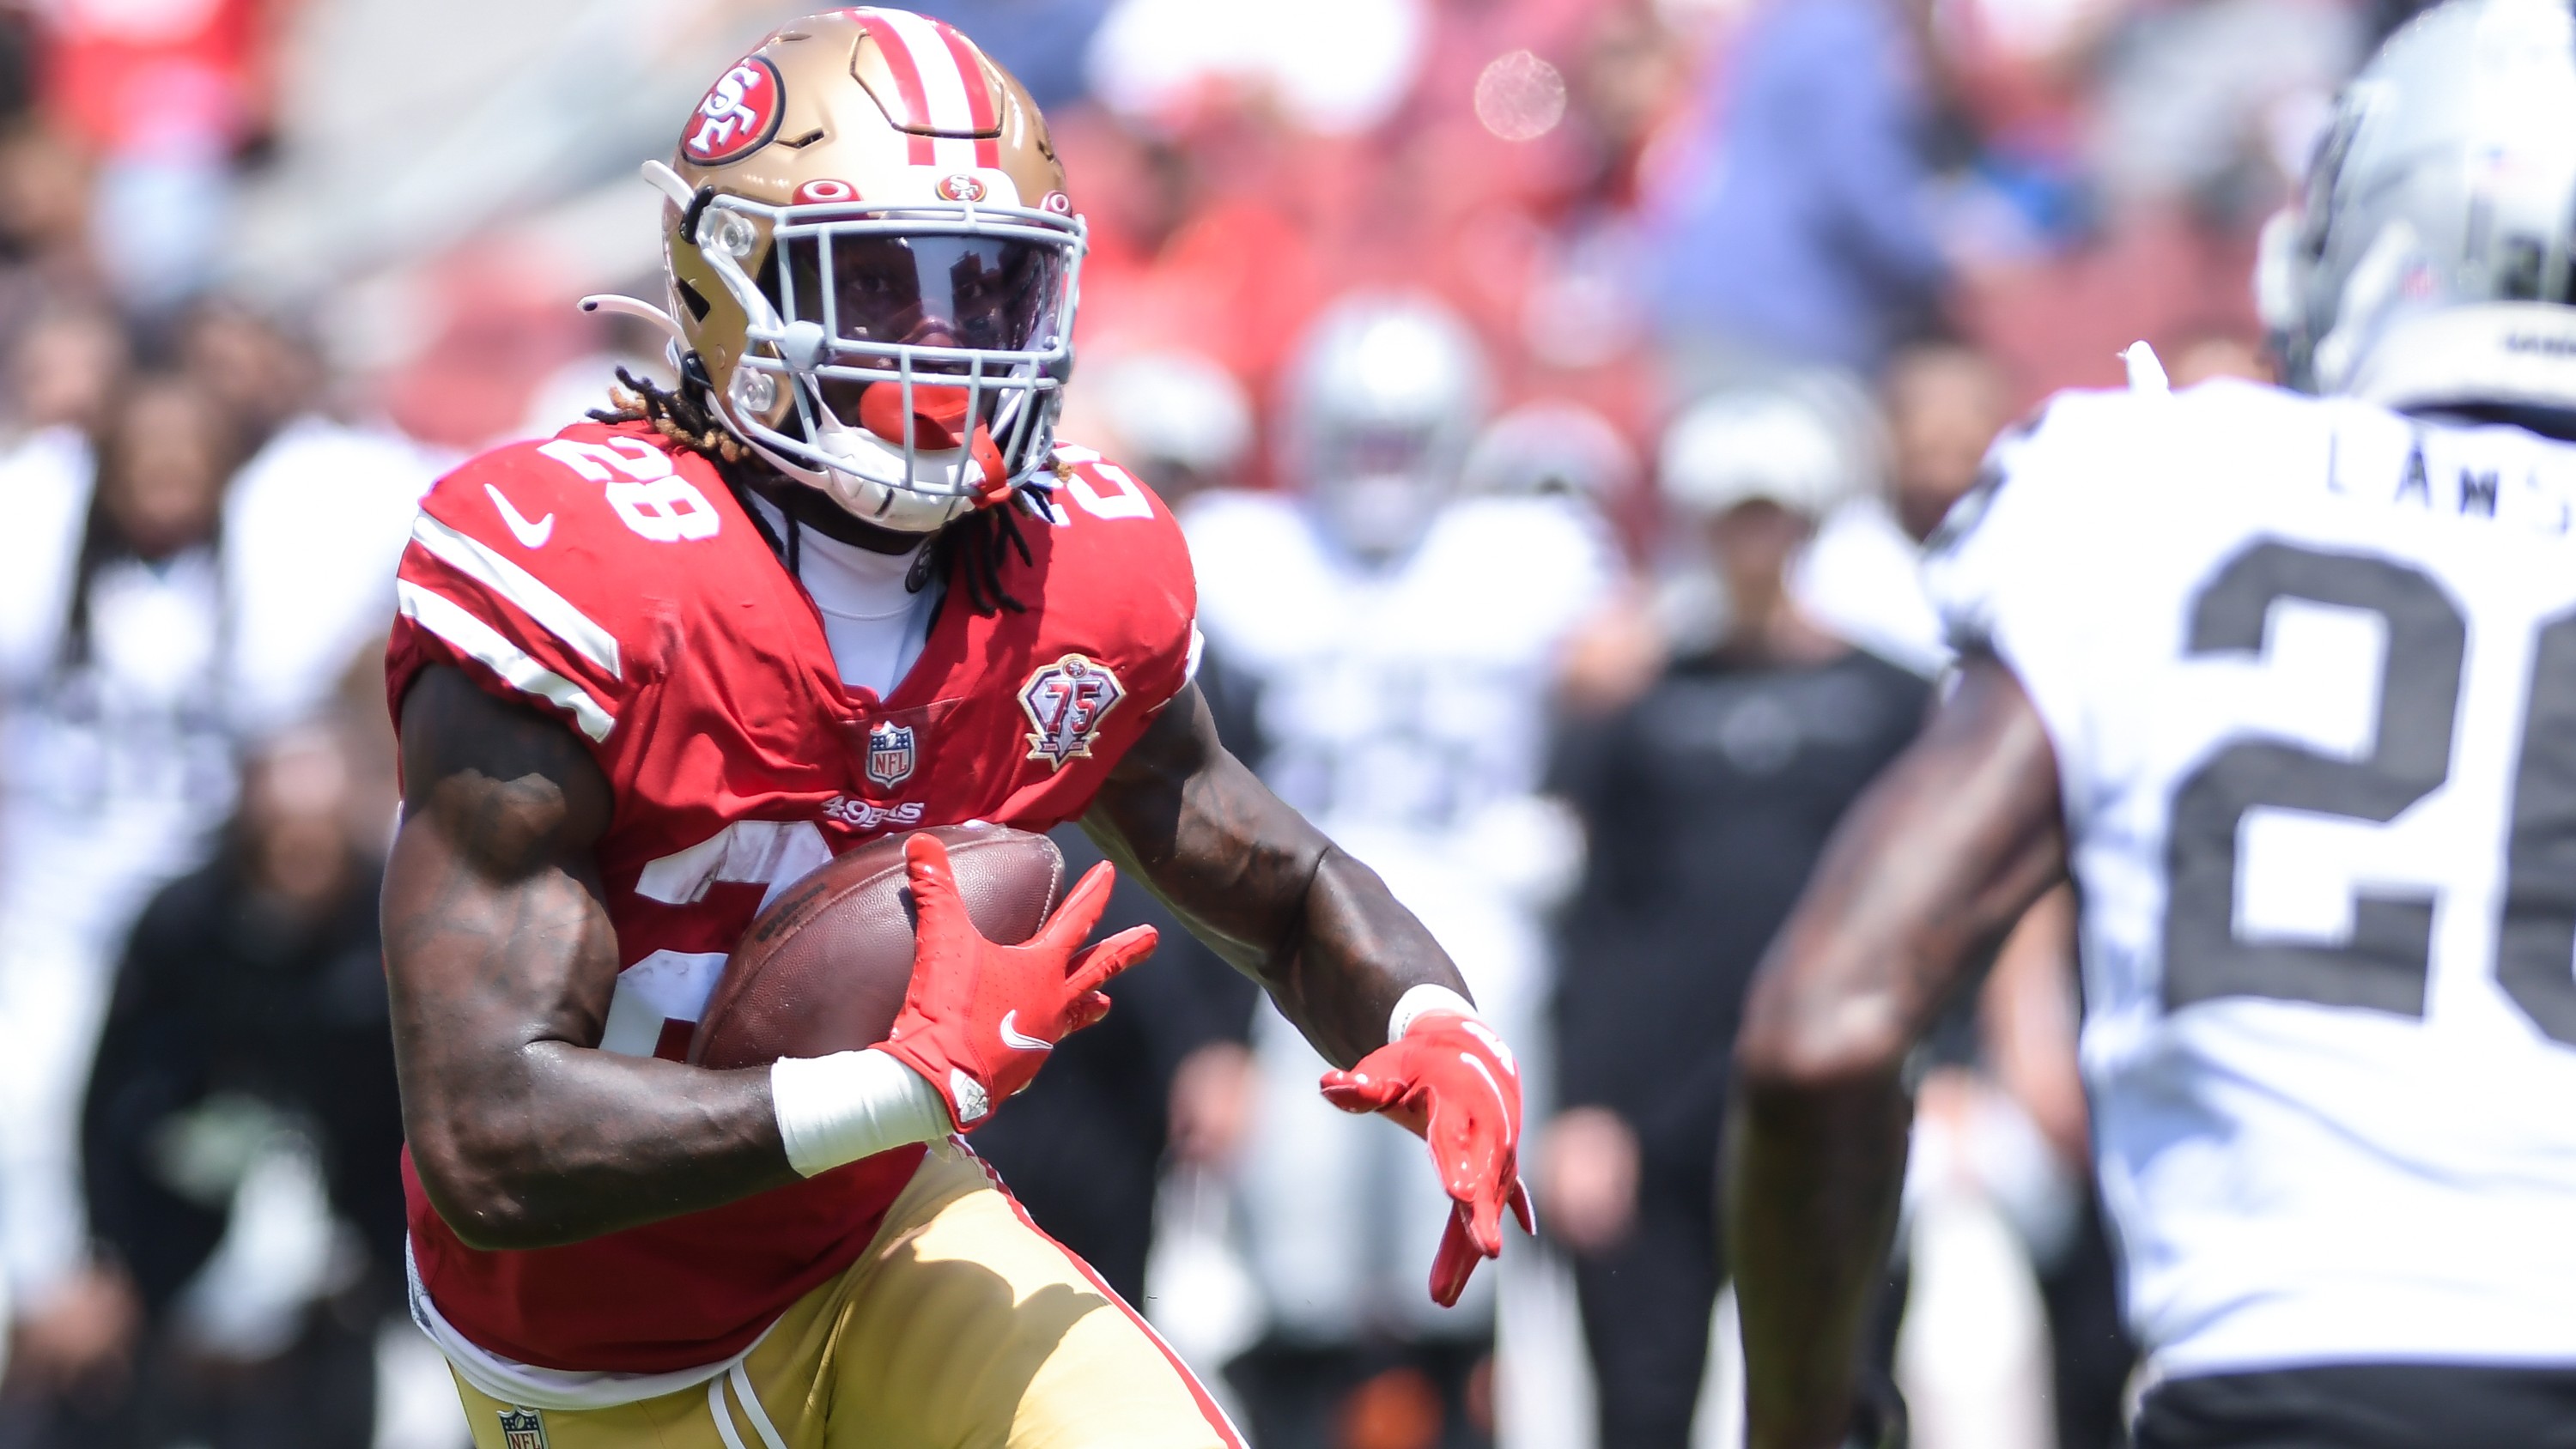 Why isn't Trey Sermon playing for 49ers? Week 1 healthy scratch surprises fantasy owners